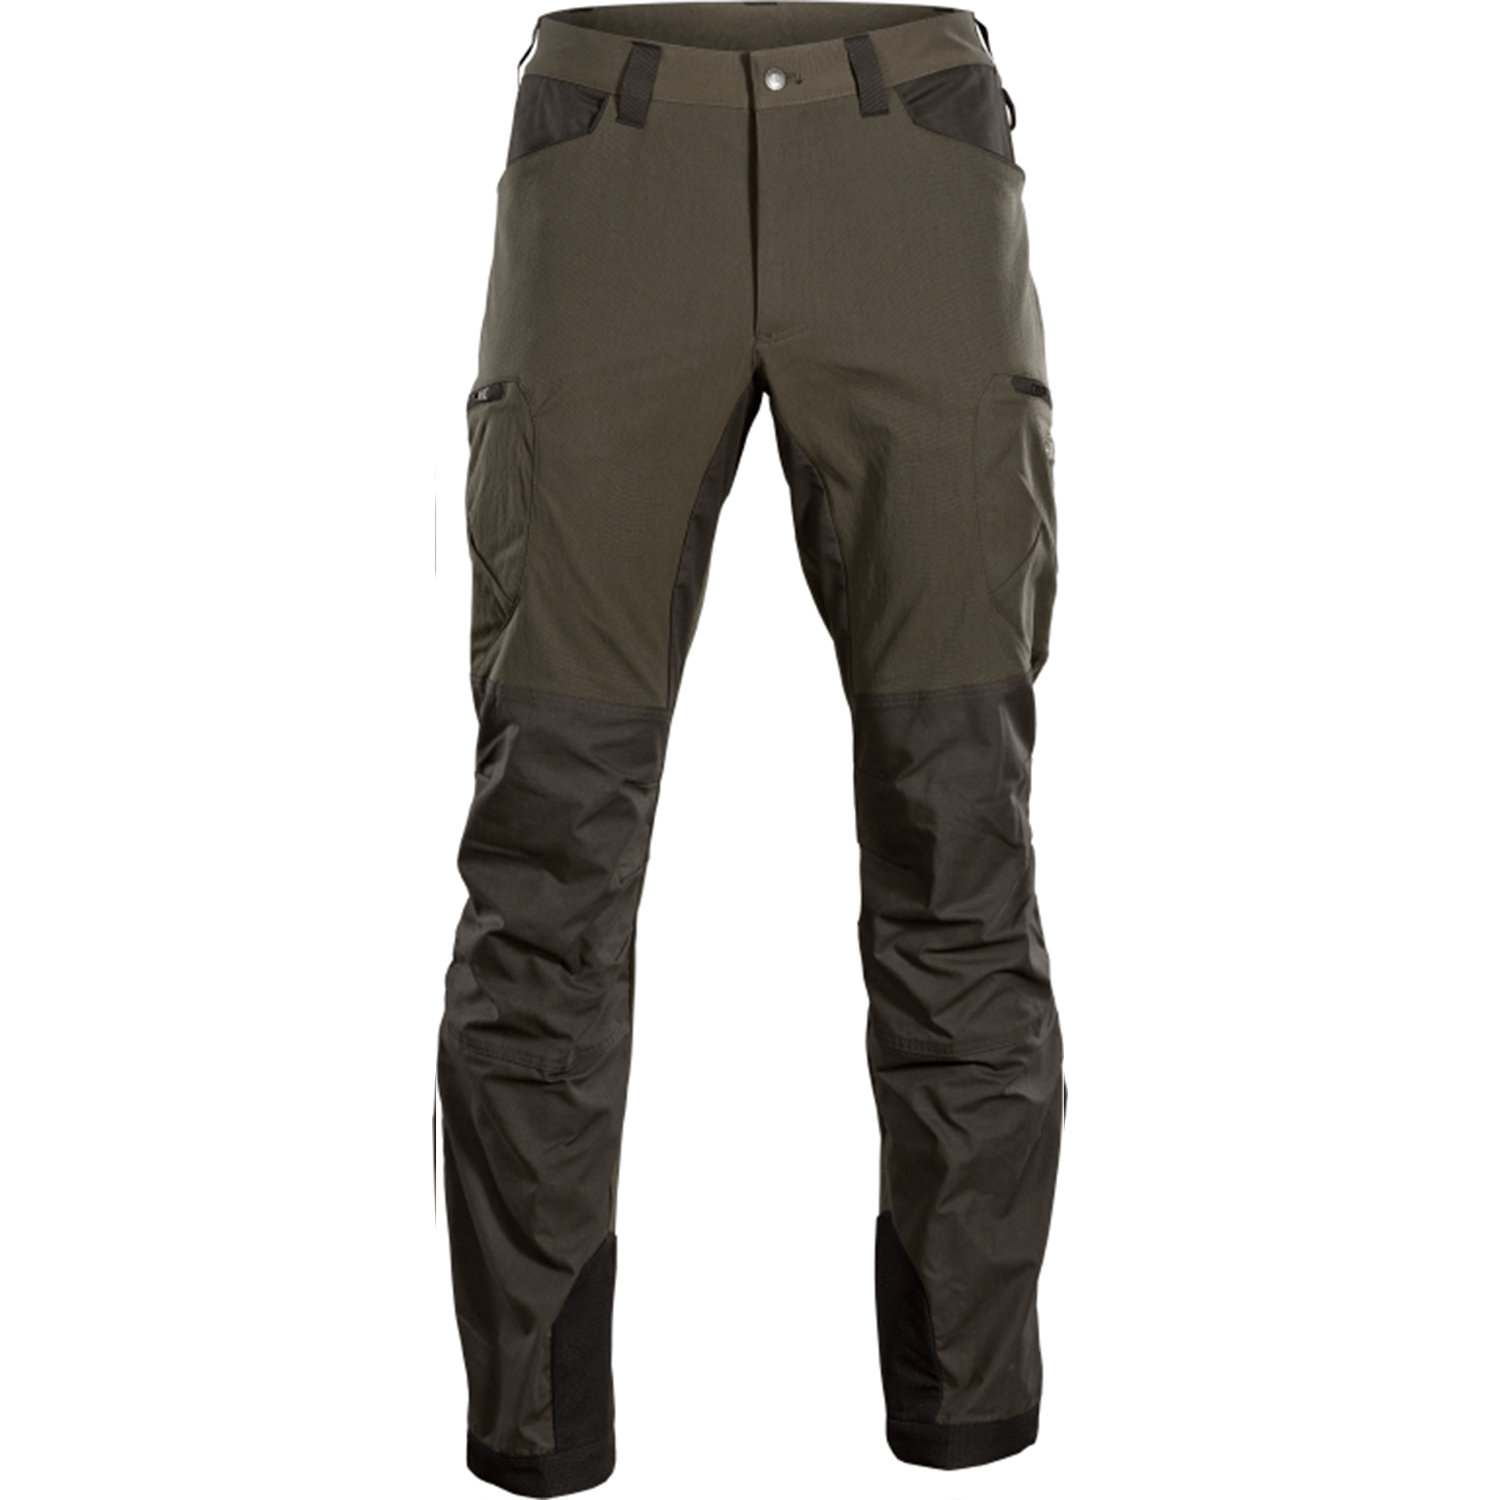 Härkila Ragnar Trousers (Willow Green/Shadow Grey) - Hunting Clothing